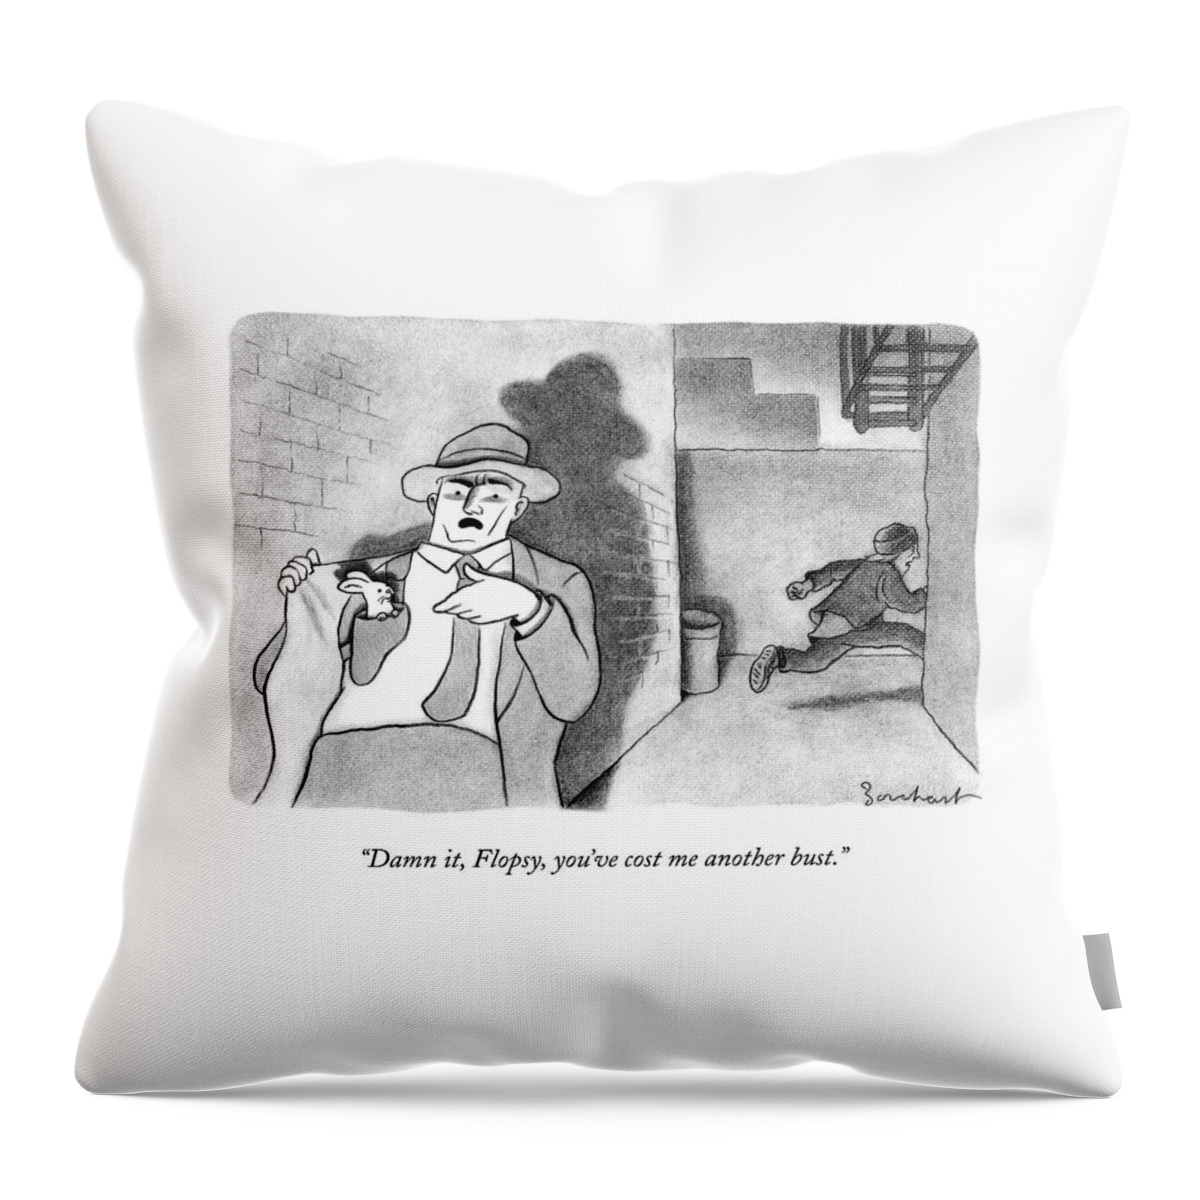 A Detective Opens His Jacket Pocket To Find Throw Pillow